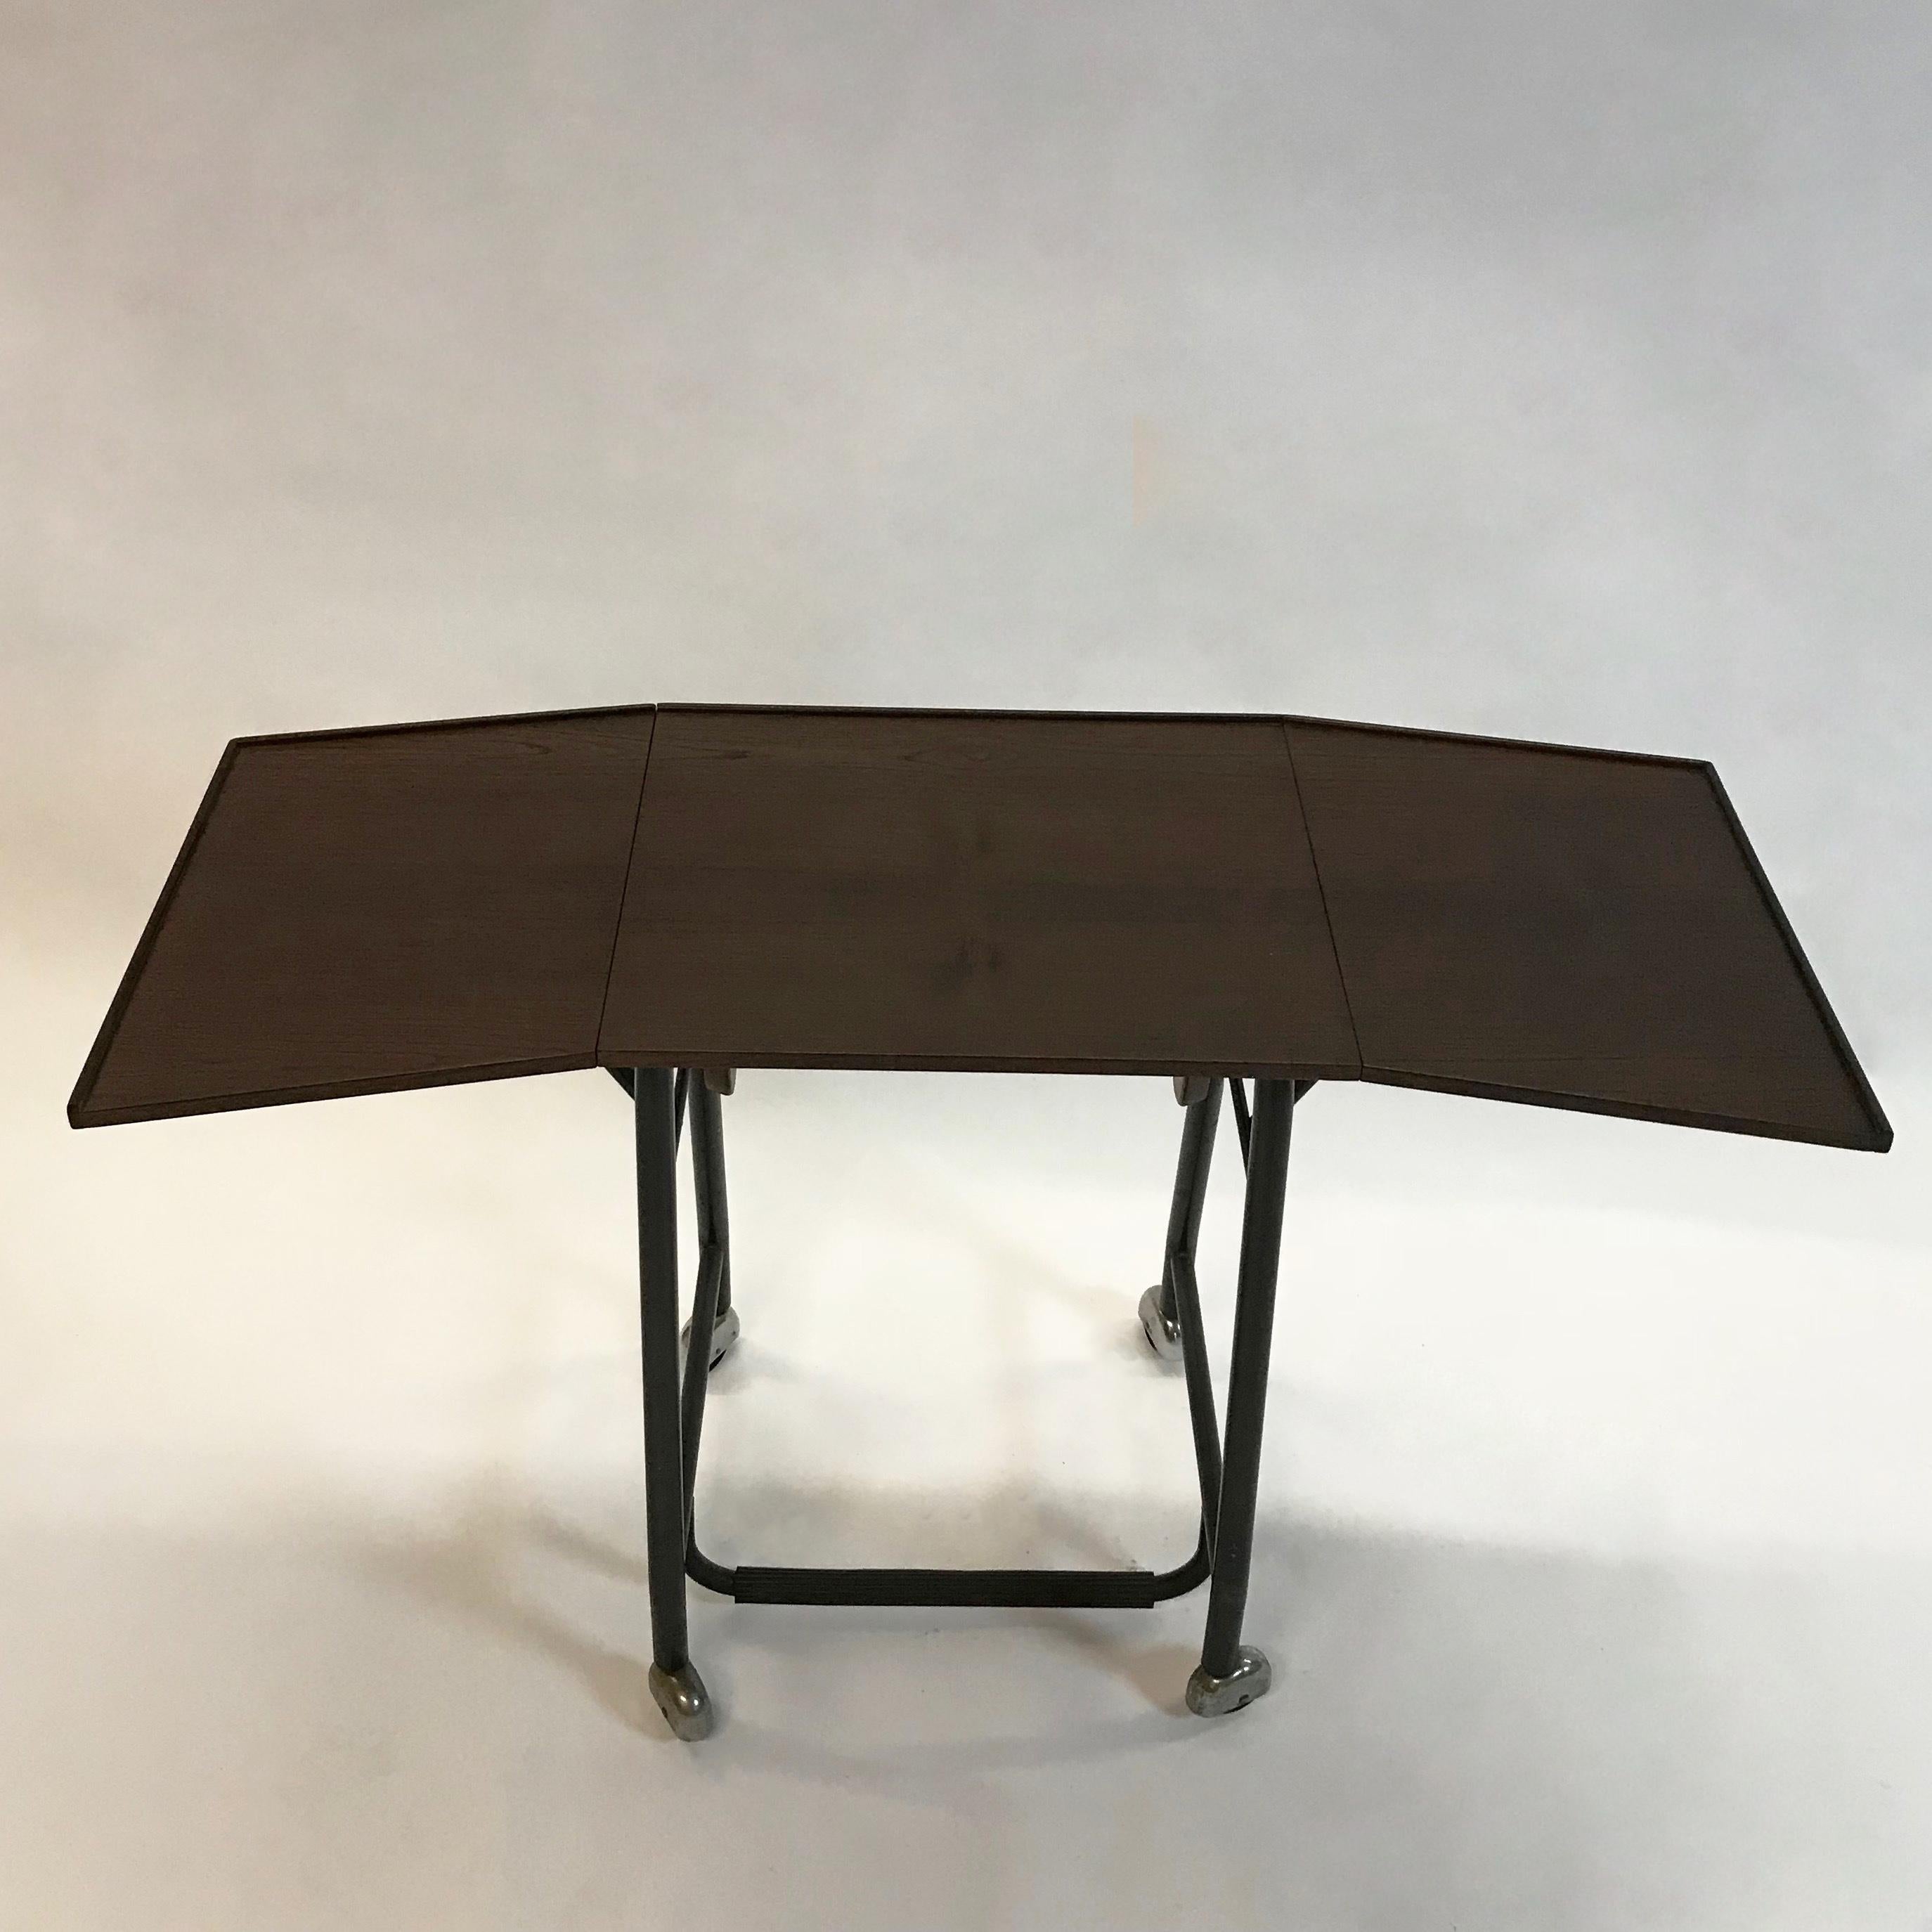 20th Century Kevi Gate-Fold Rolling Typewriter Table by Jorgen Rasmussen for Knoll